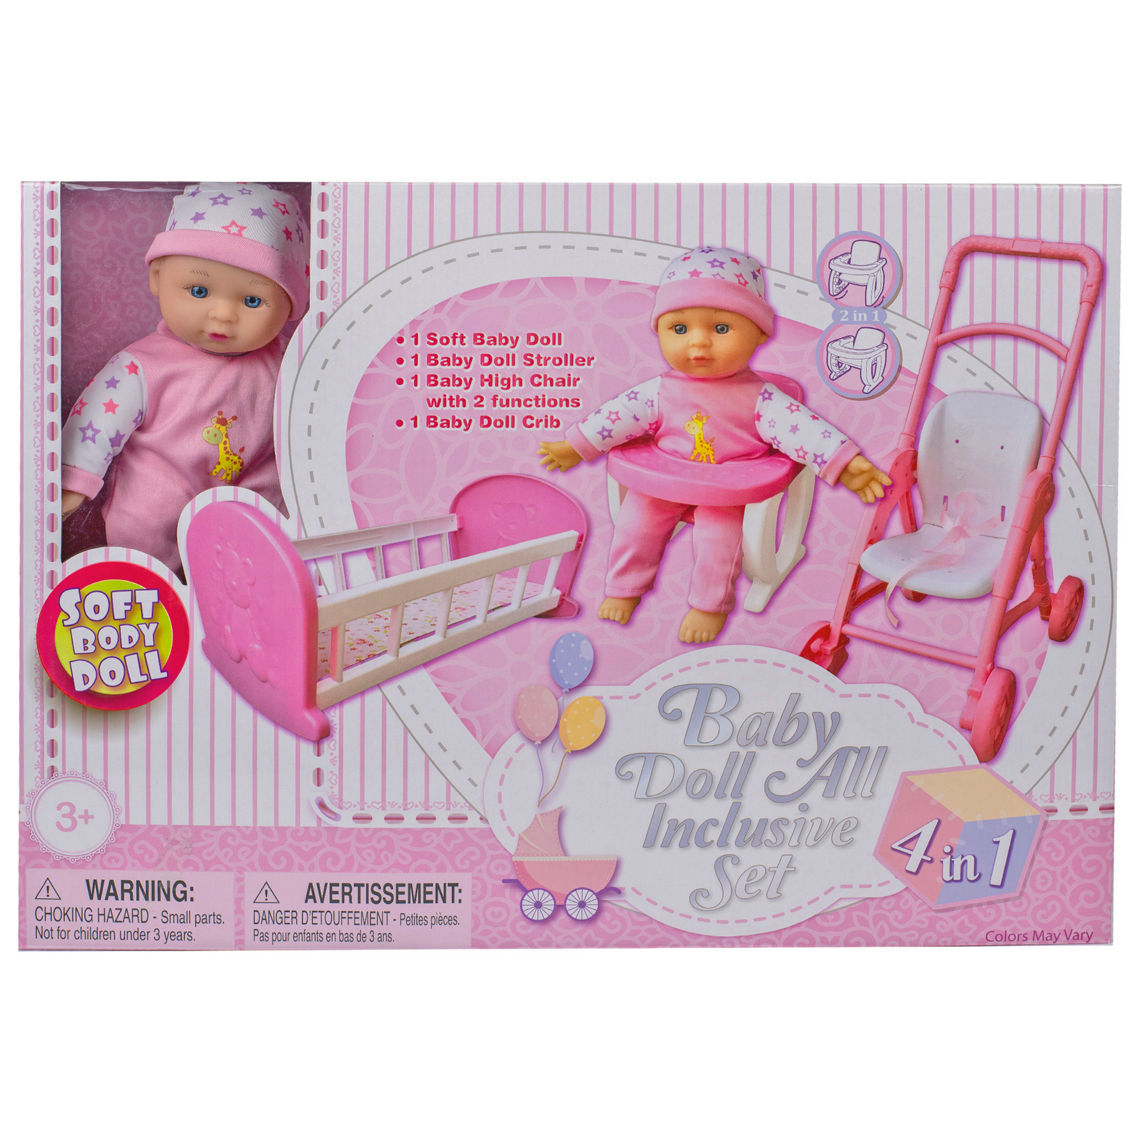 Kid Concepts 13 in. Soft Body Doll 4 in 1 Set - Image 2 of 2